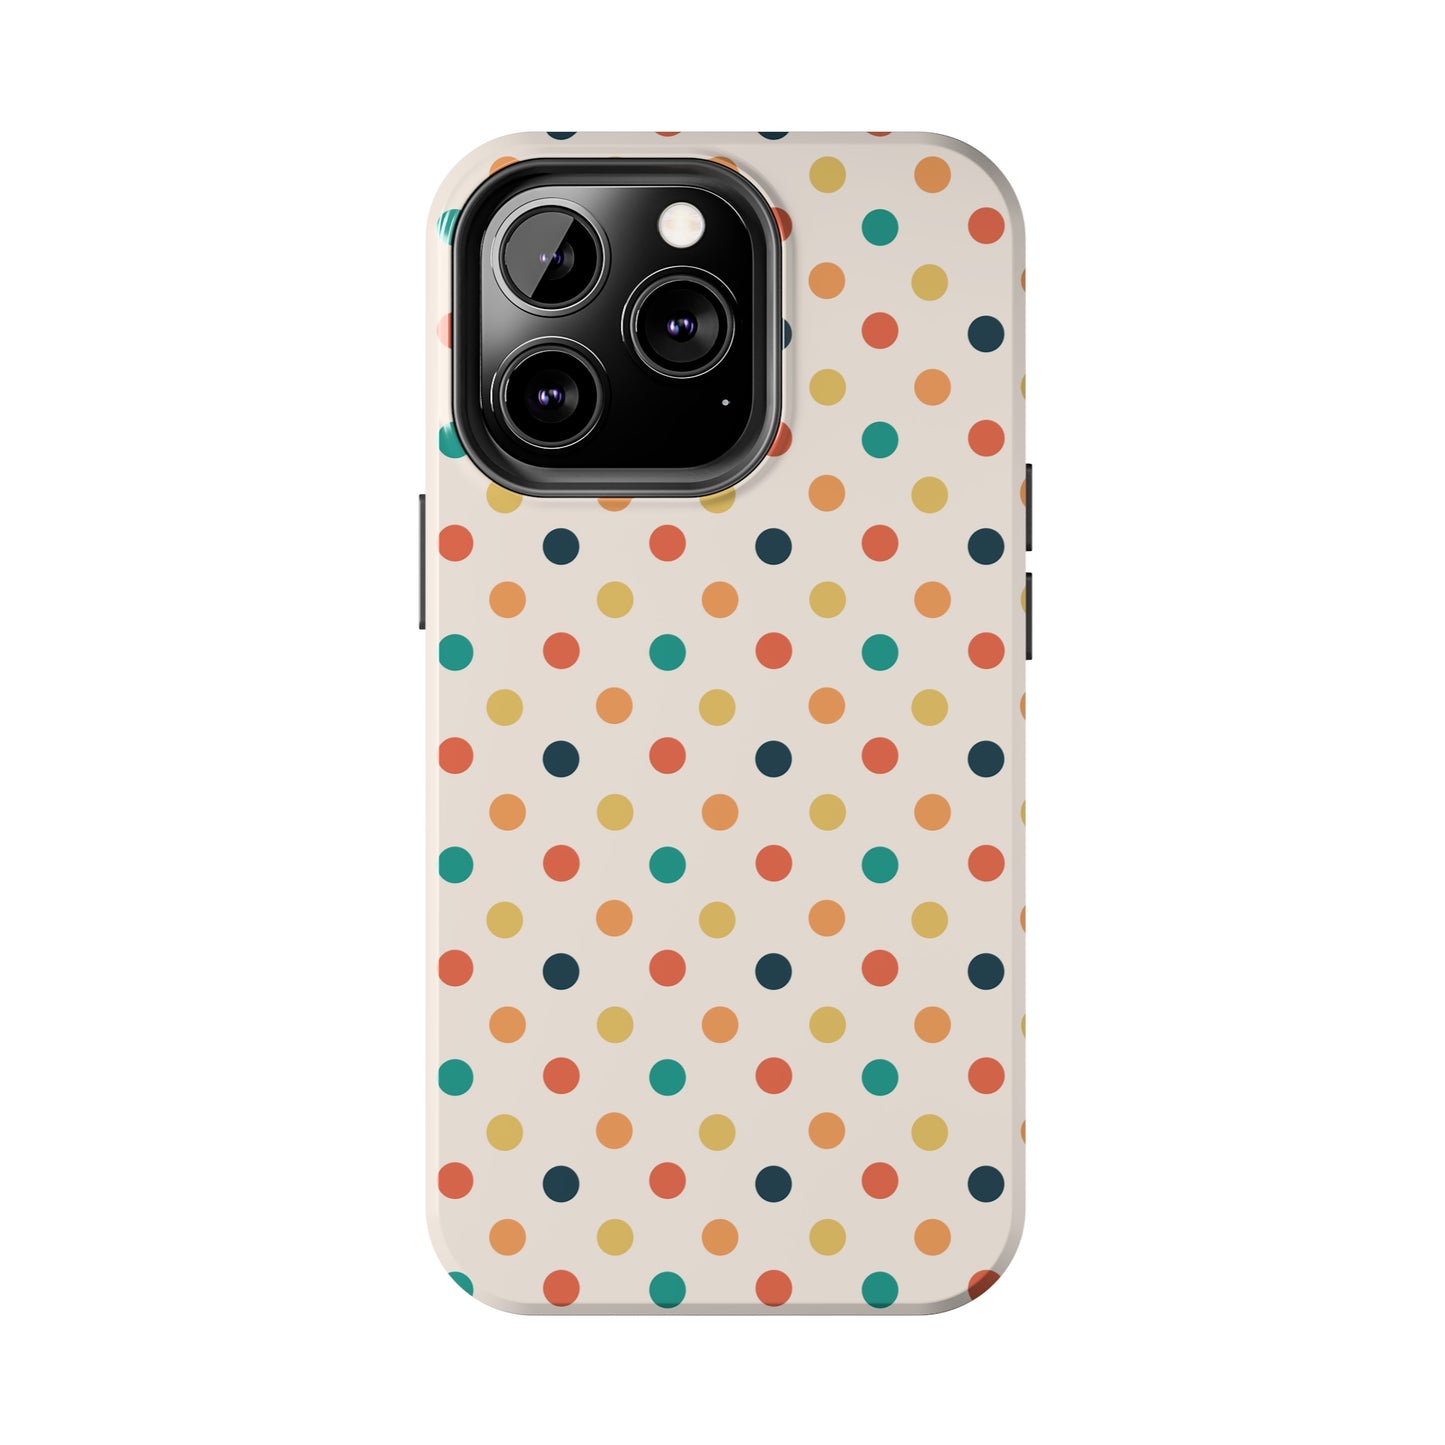 Sunbaked Polka Dots Tough Phone Cases, Case-Mate